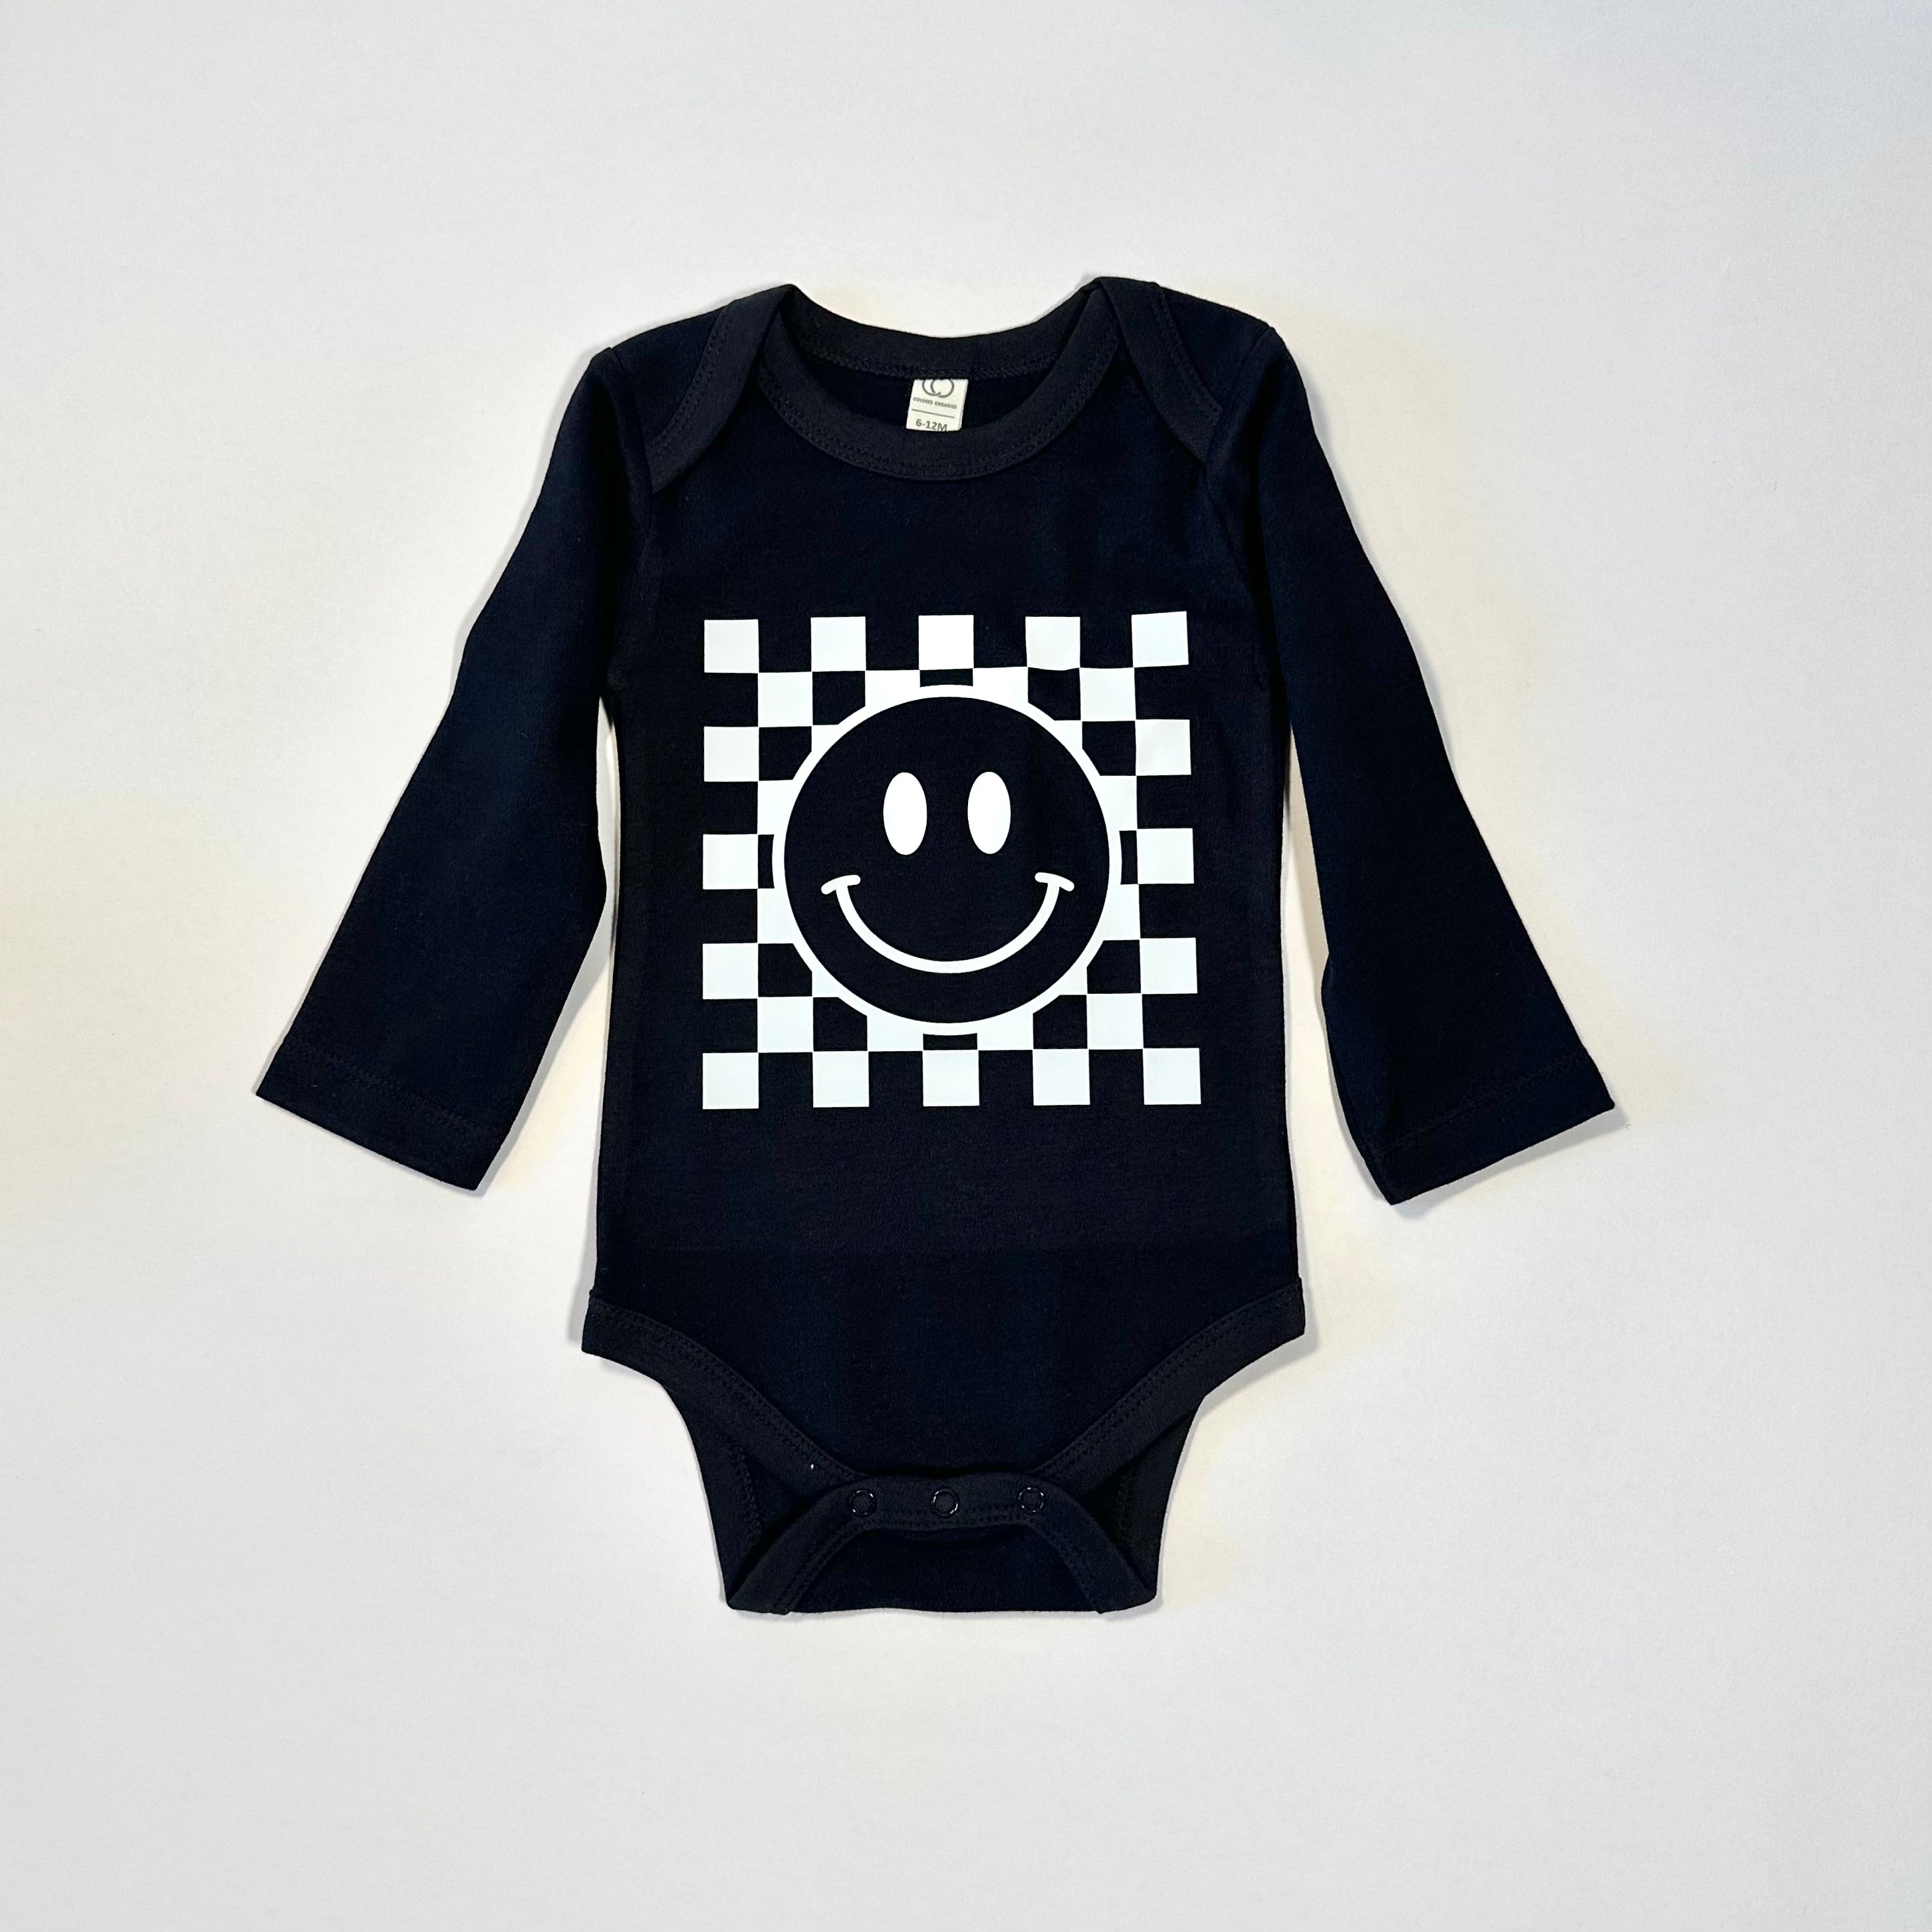 Checkered Smiley Long Sleeve Body Suit for Babes